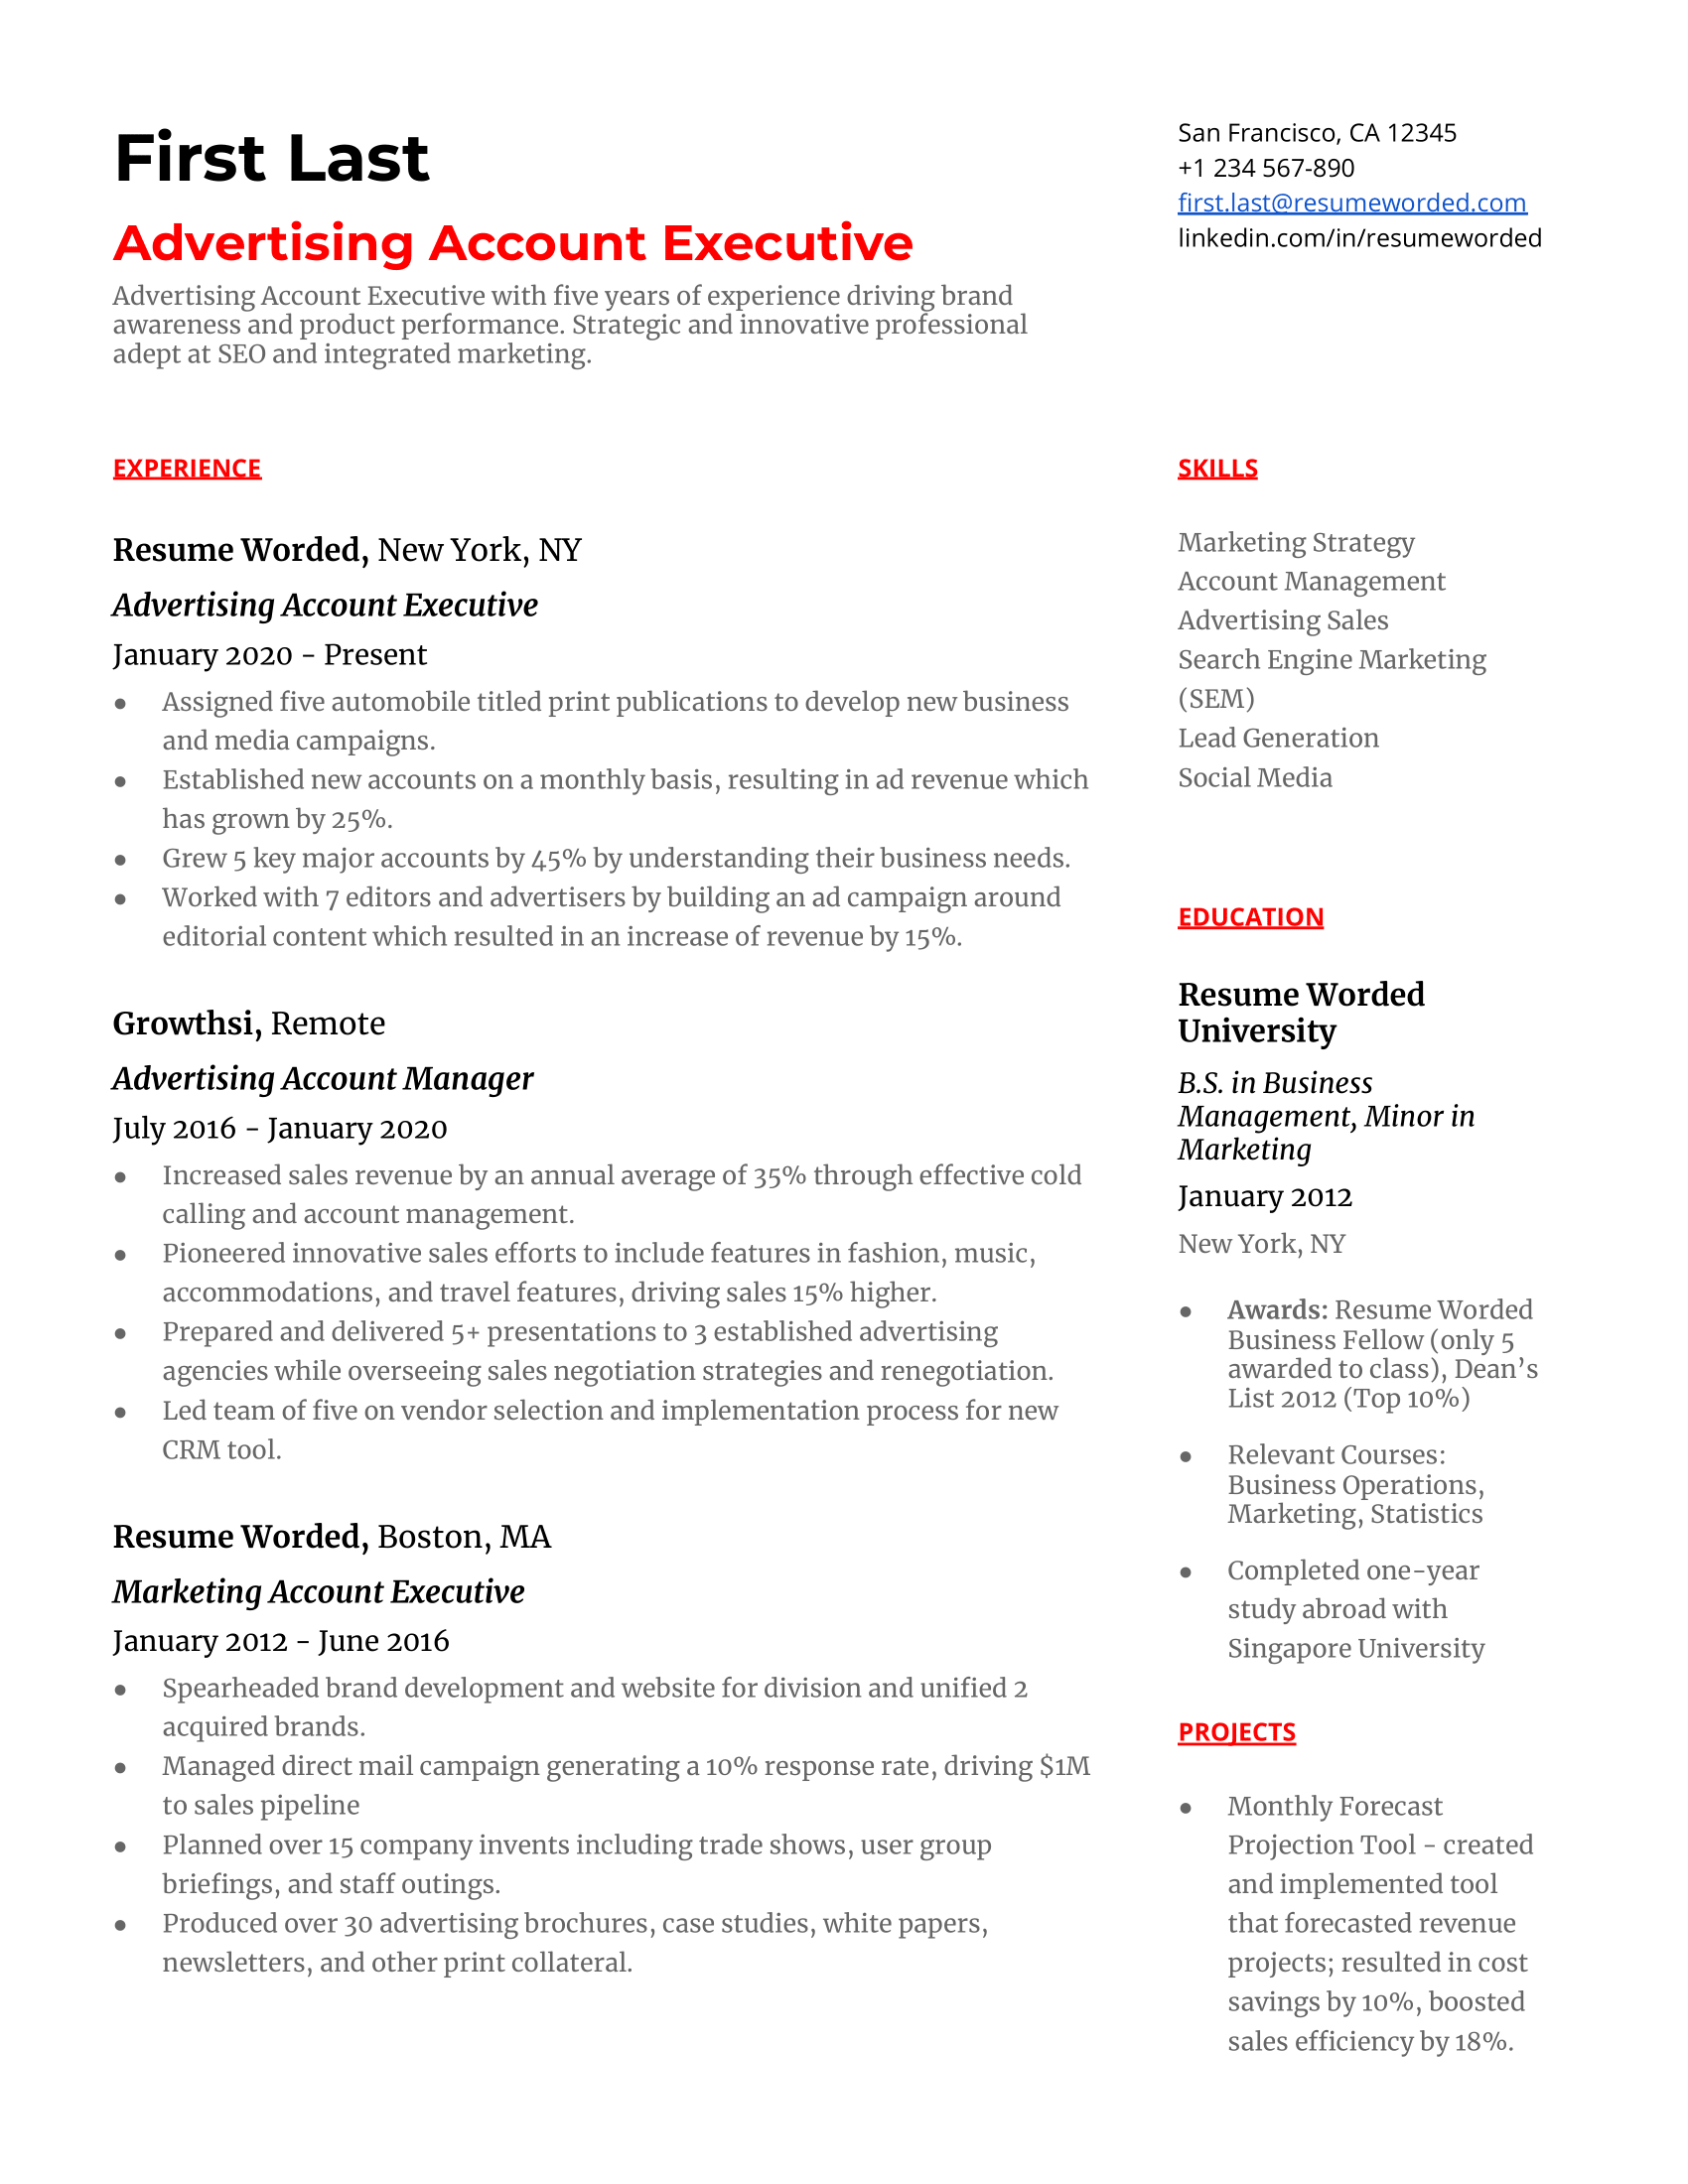 Advertising Account Executive Resume Template + Example